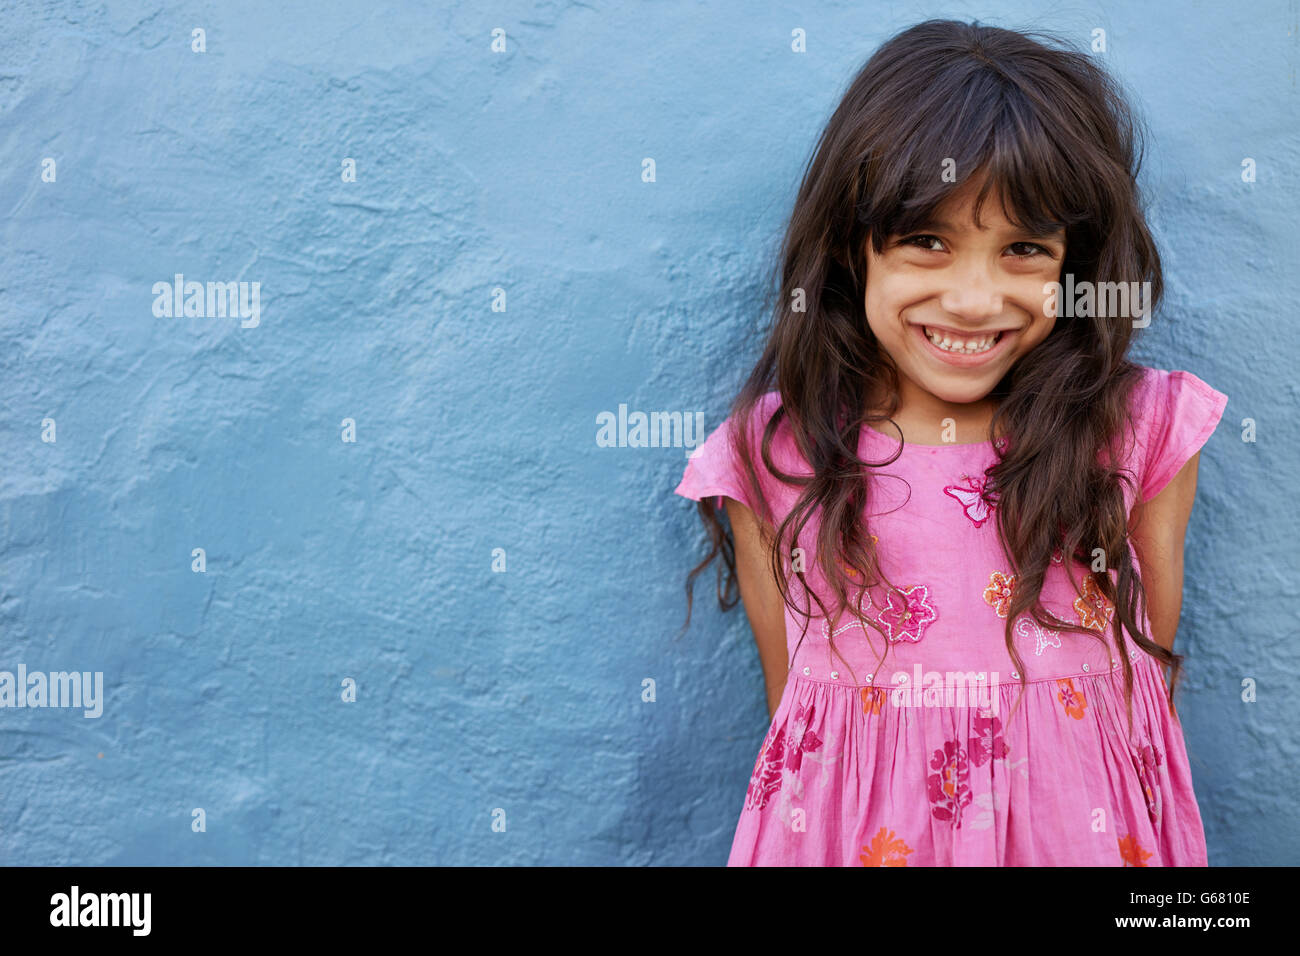 Portrait of cute little girl looking at camera and smiling while standing against blue wall. Innocent young female child with co Stock Photo